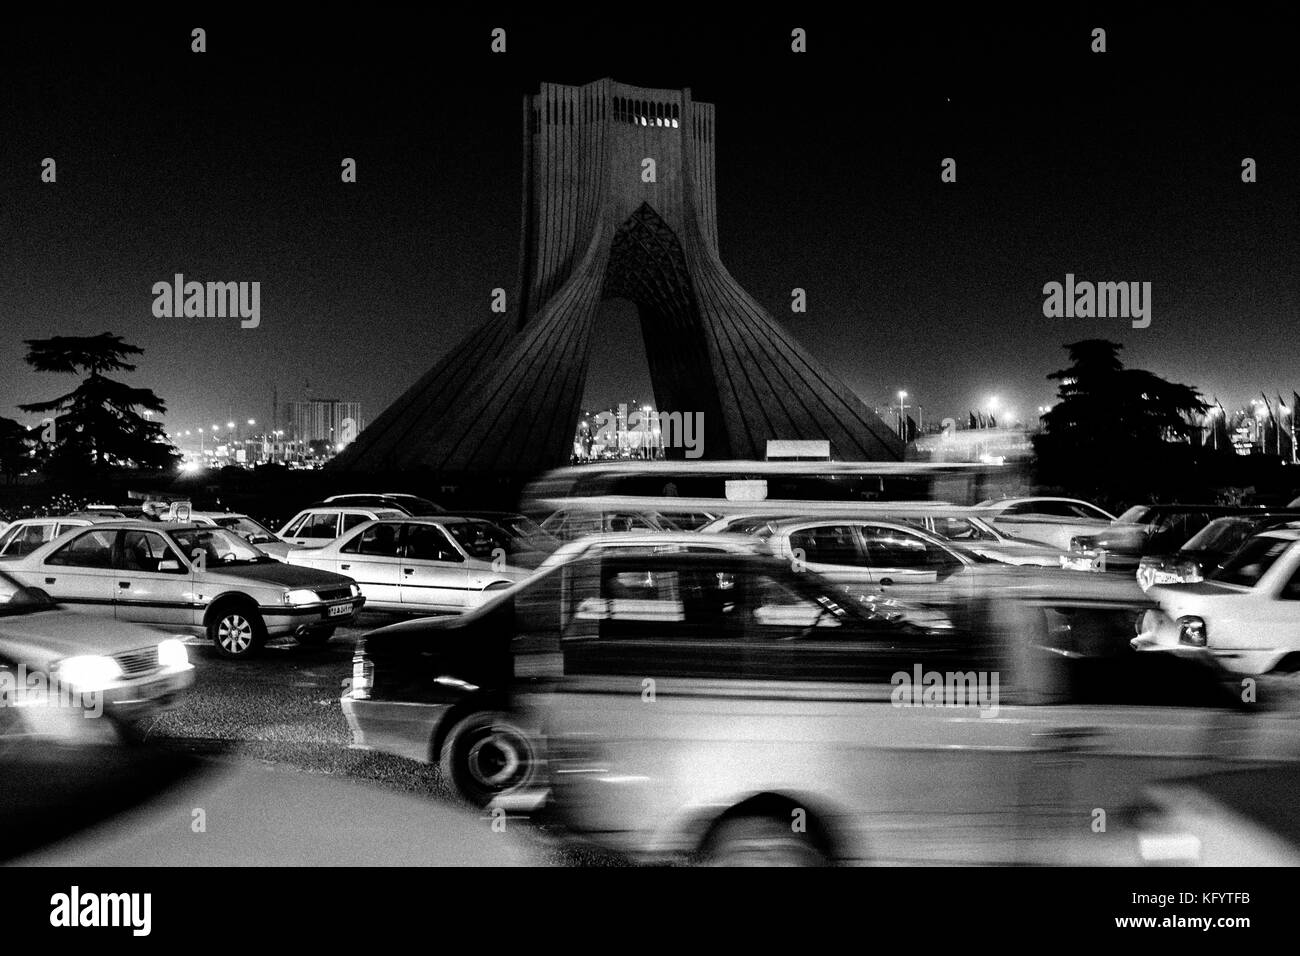 Tehran, Iran - December 29, 2013. Heavy car traffic around the Azadi Tower in Tehran City. The Tower is also known as the Freedom or Liberty Tower. Stock Photo